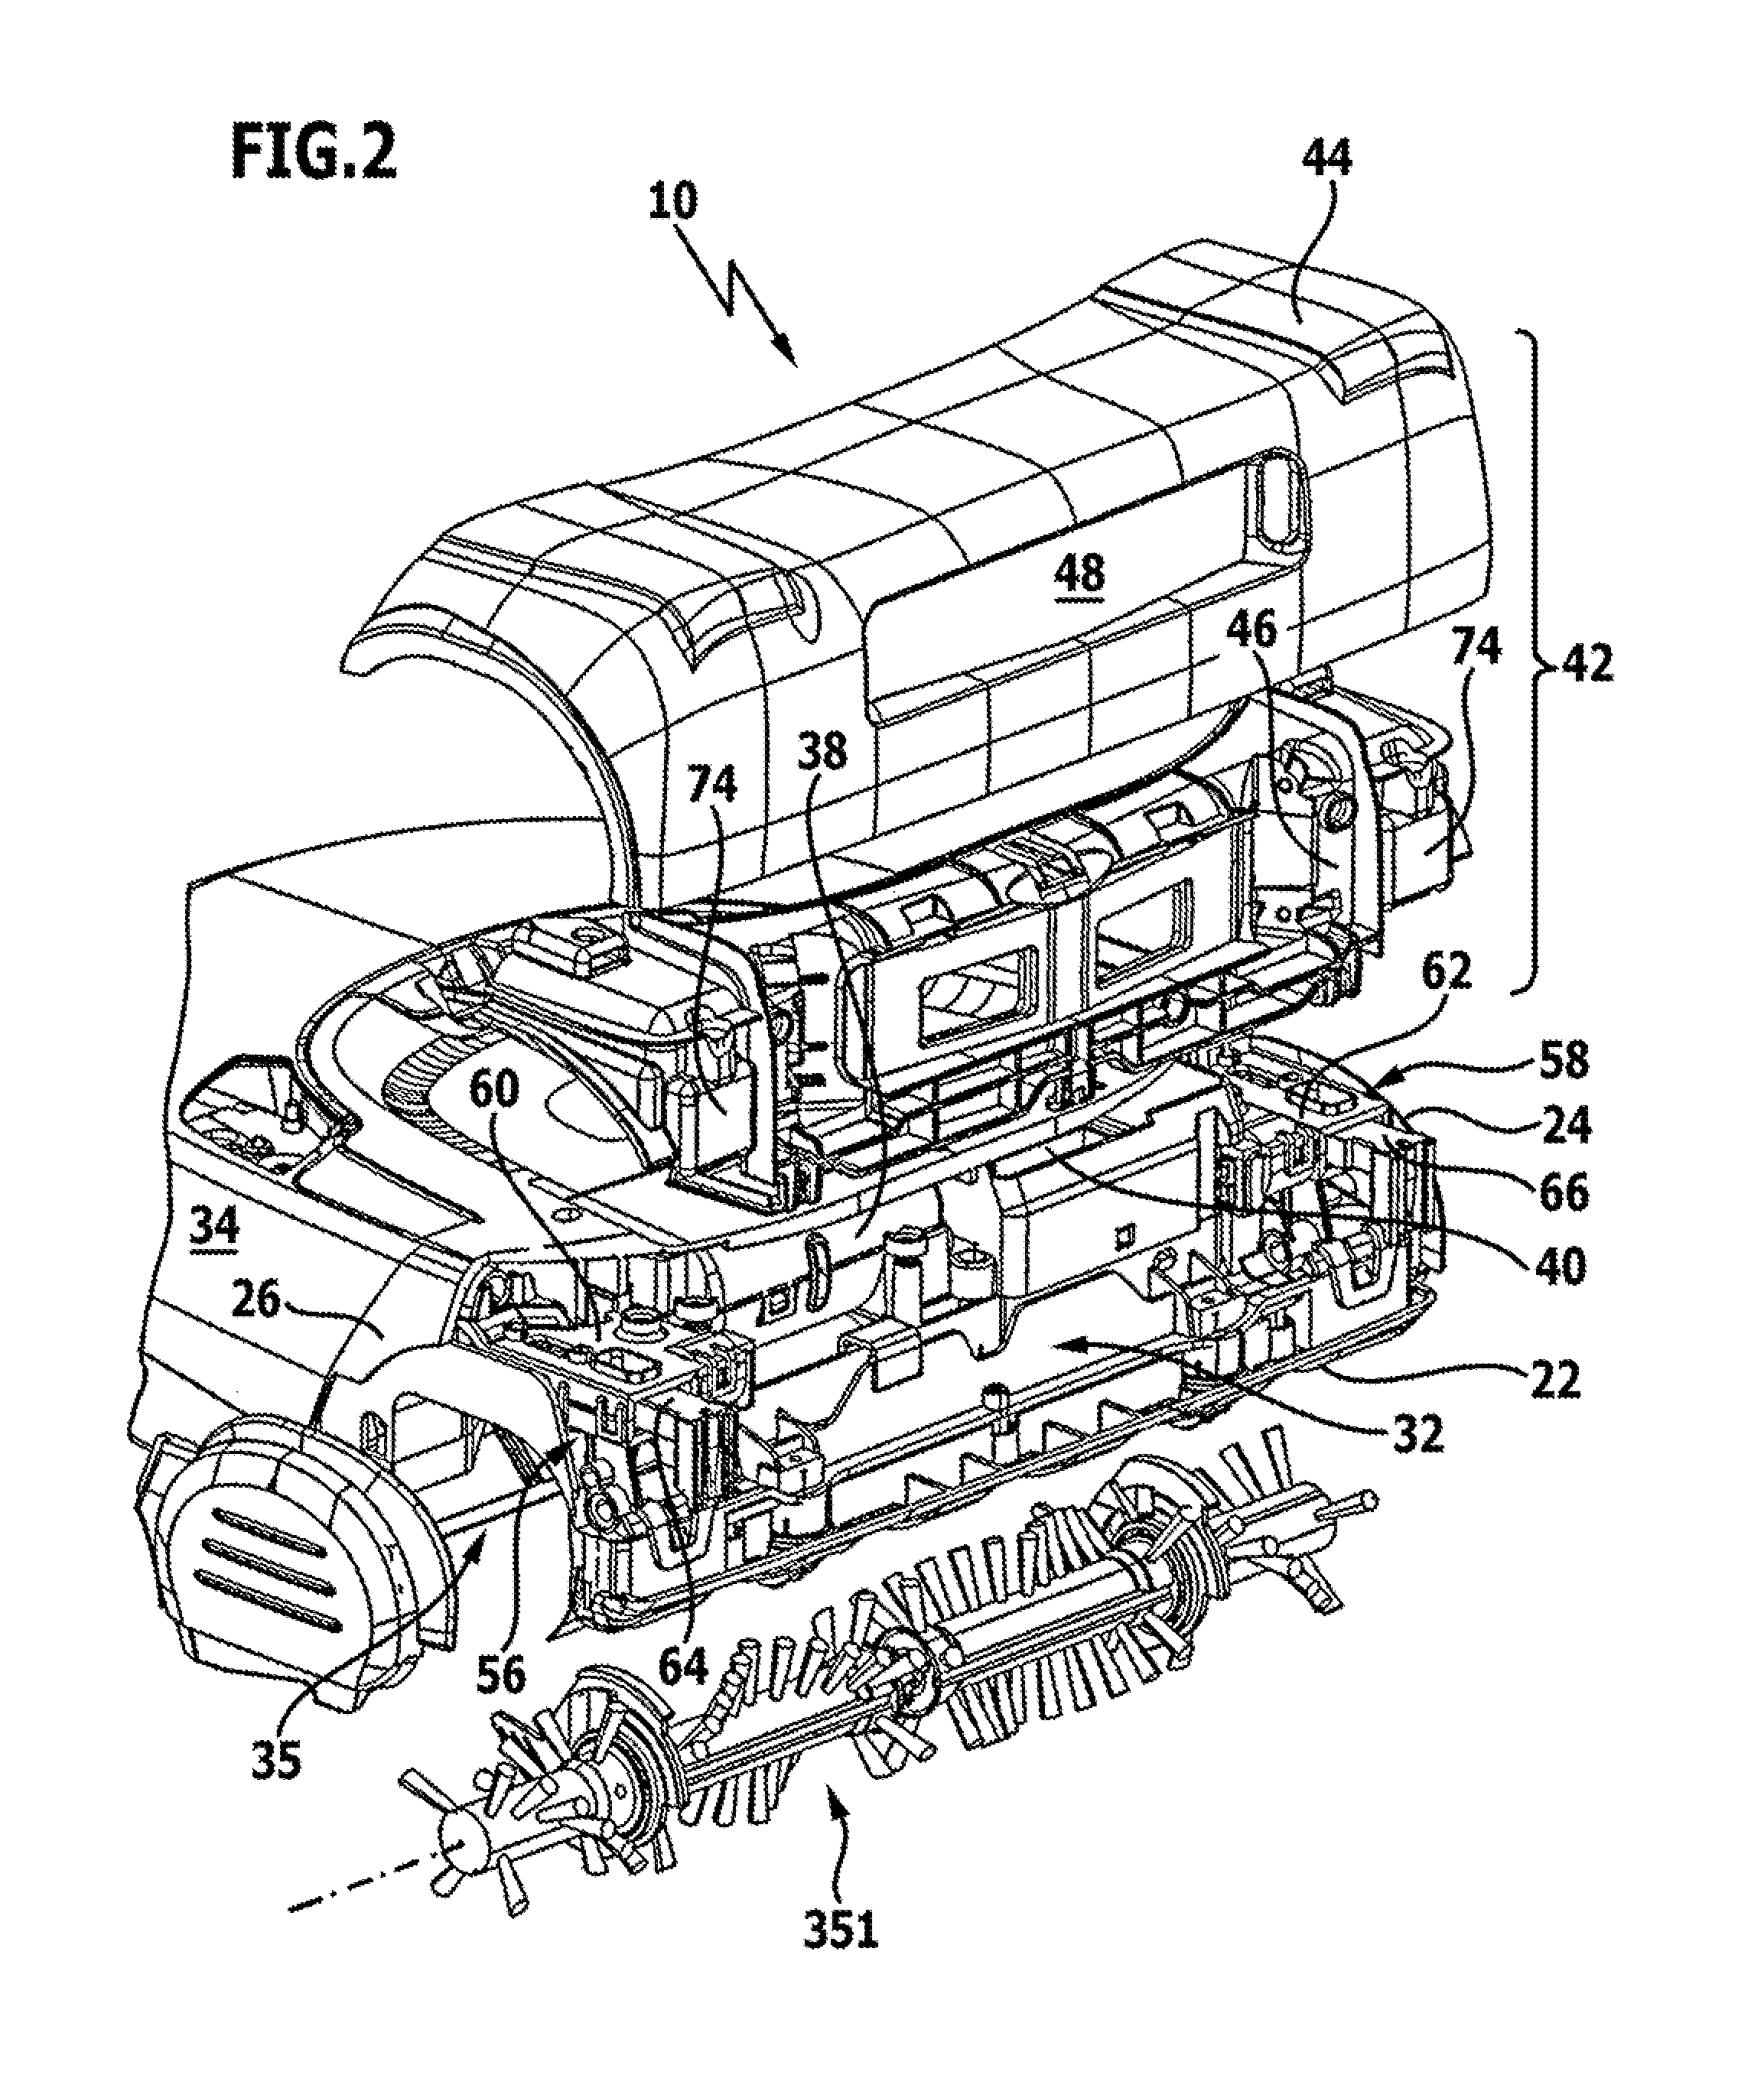 Self-propelled and self-steering floor cleaning appliance